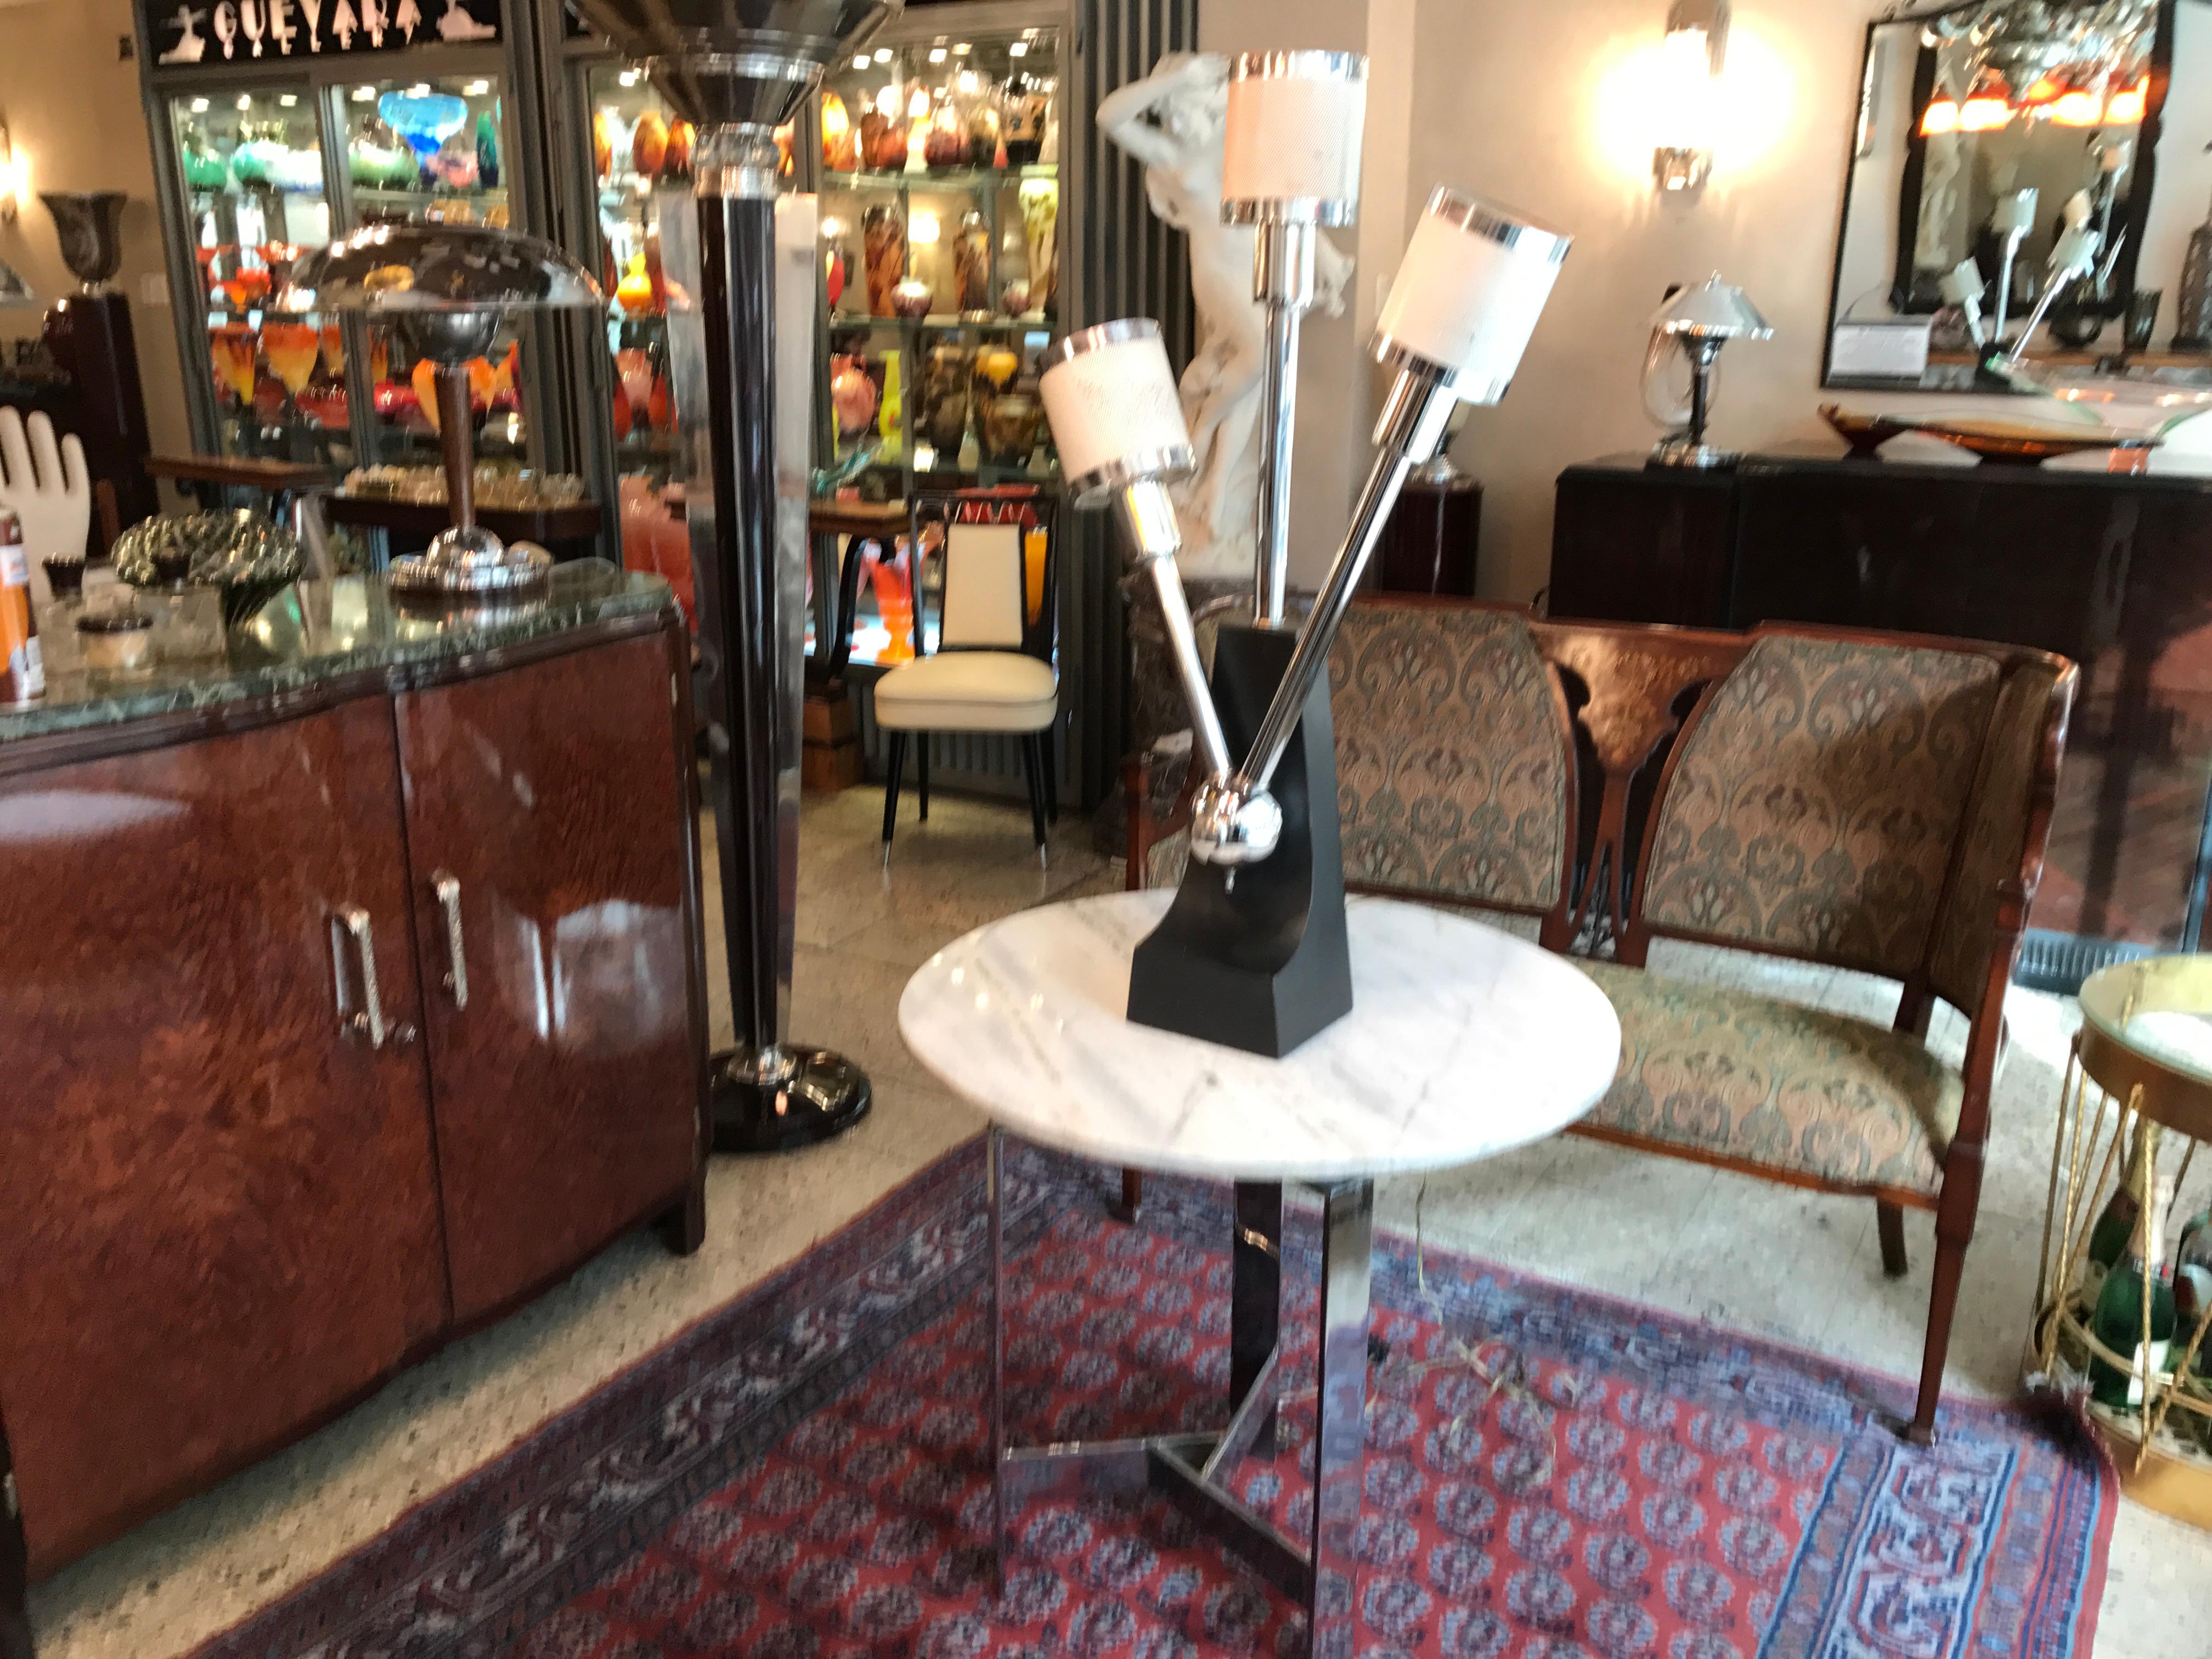 Table lamp Art deco

Materia: wood and chrome
Country: Italian
To take care of your property and the lives of our customers, the new wiring has been done.
If you want to live in the golden years, this is the table lamp that your project needs.
We